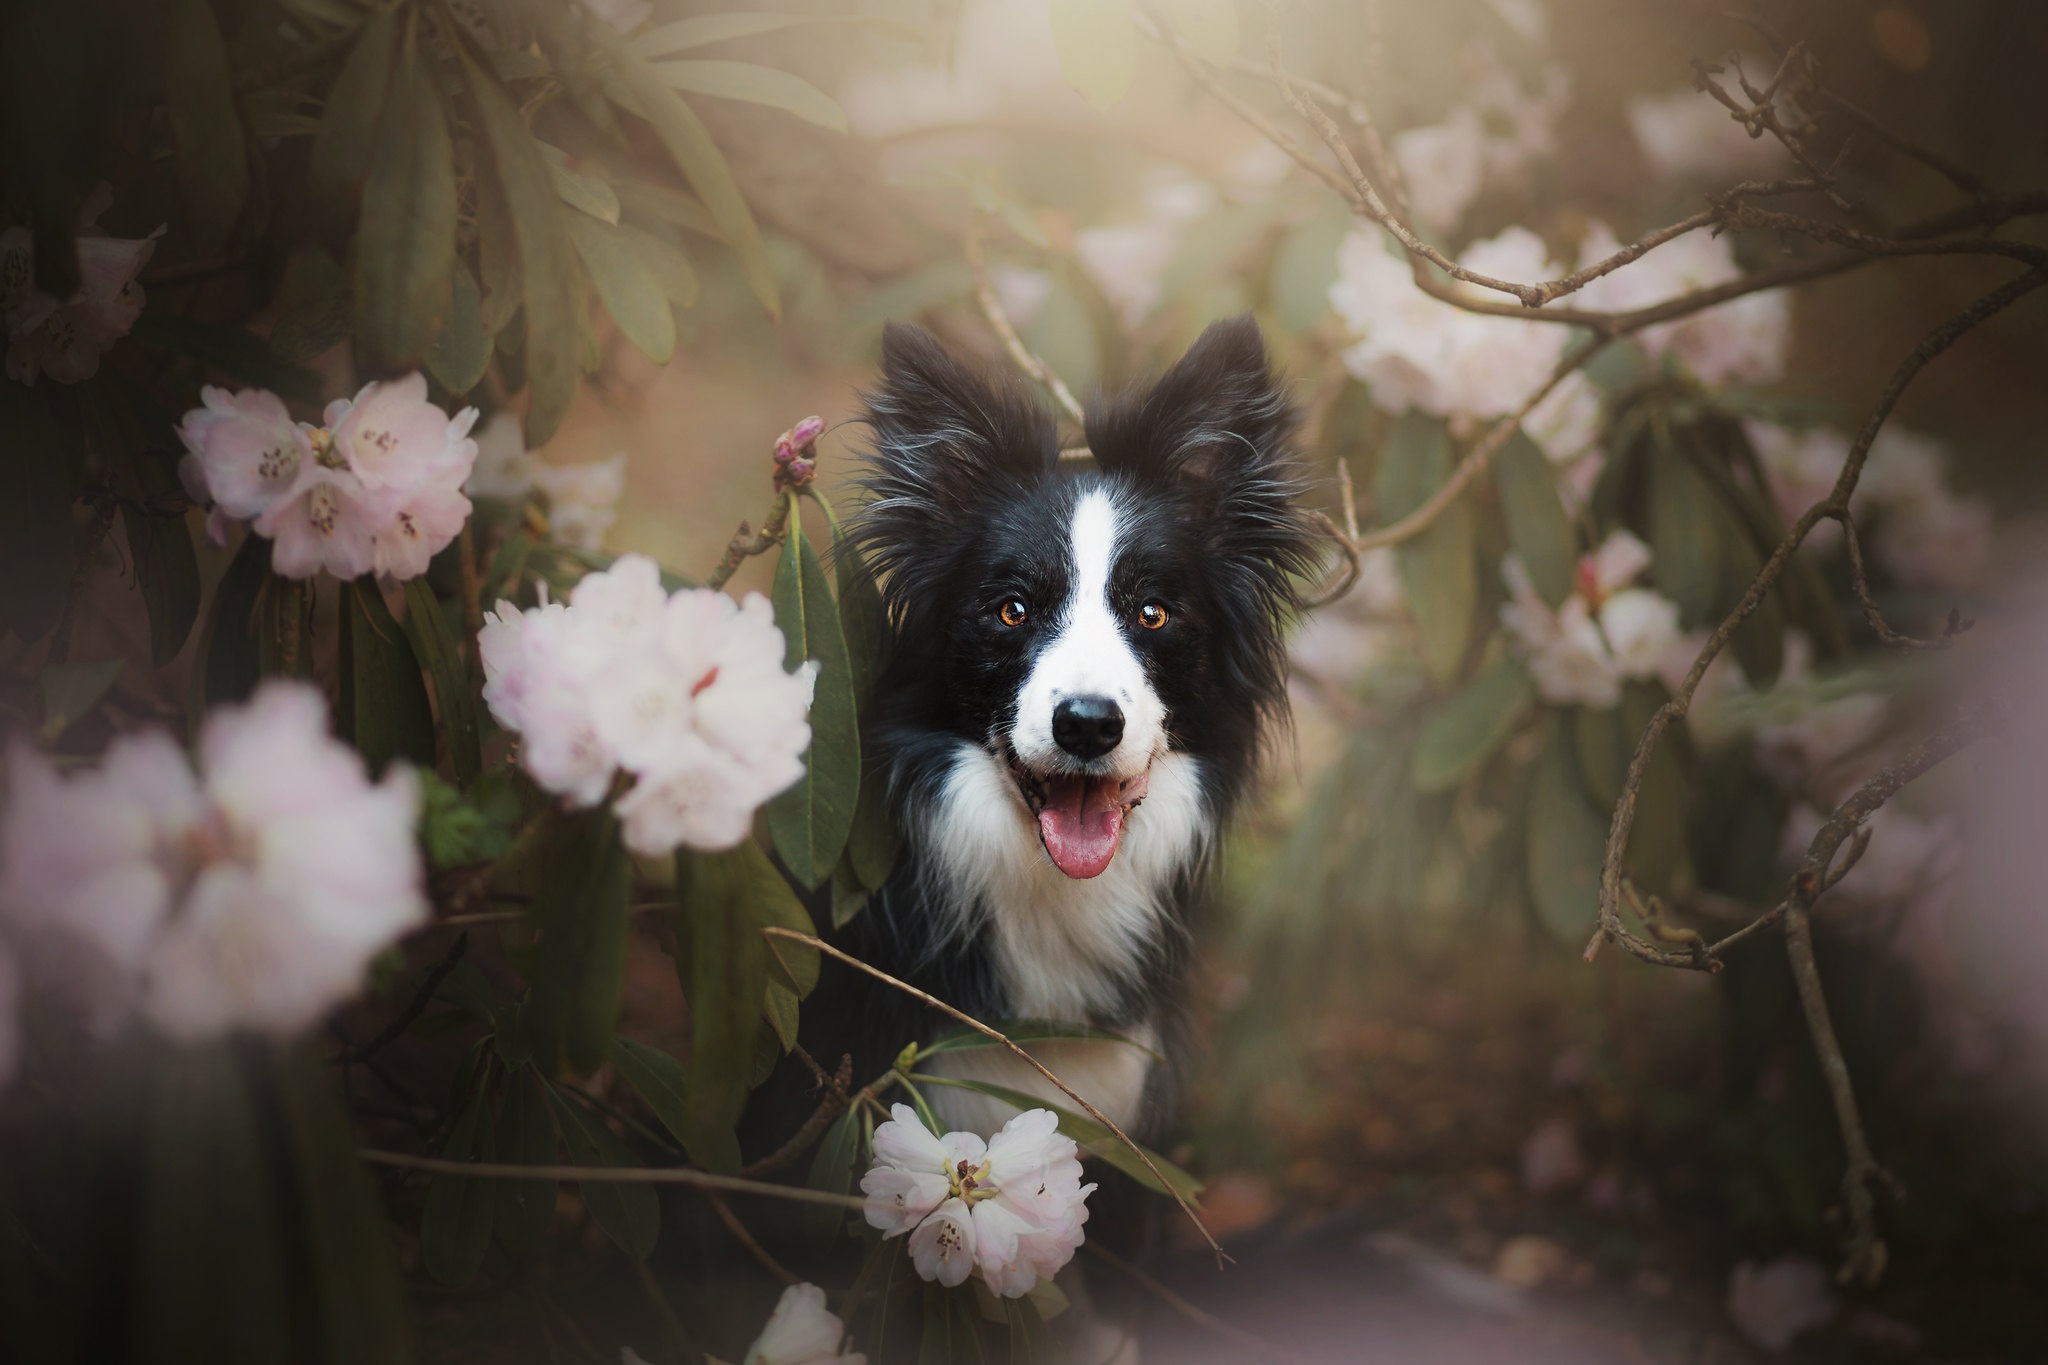 Border Collie Dog Animals Mammals Outdoors Flowers Pink Flowers Plants Twigs Leaves 2048x1365